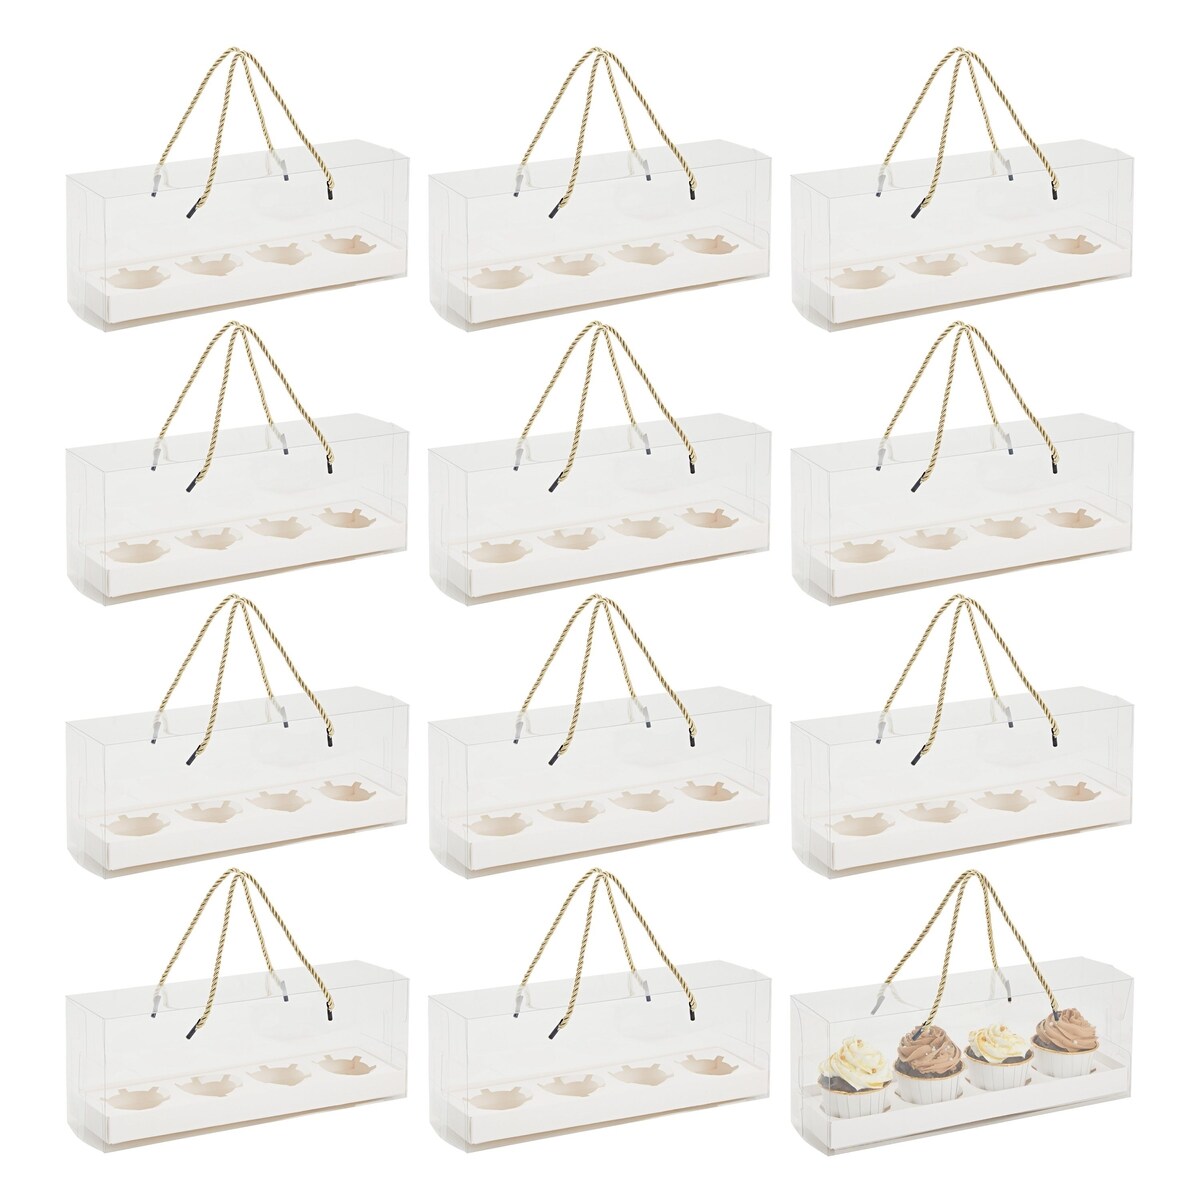 Jewelry Organizer5Layers Rotatable Small Jewelry Box Earring Holder for  WomenJewelry Storage Box Jewelry Accessory Storage Tray with Lid for  Earrings Necklaces Bracelets price in Egypt  Amazon Egypt  kanbkam